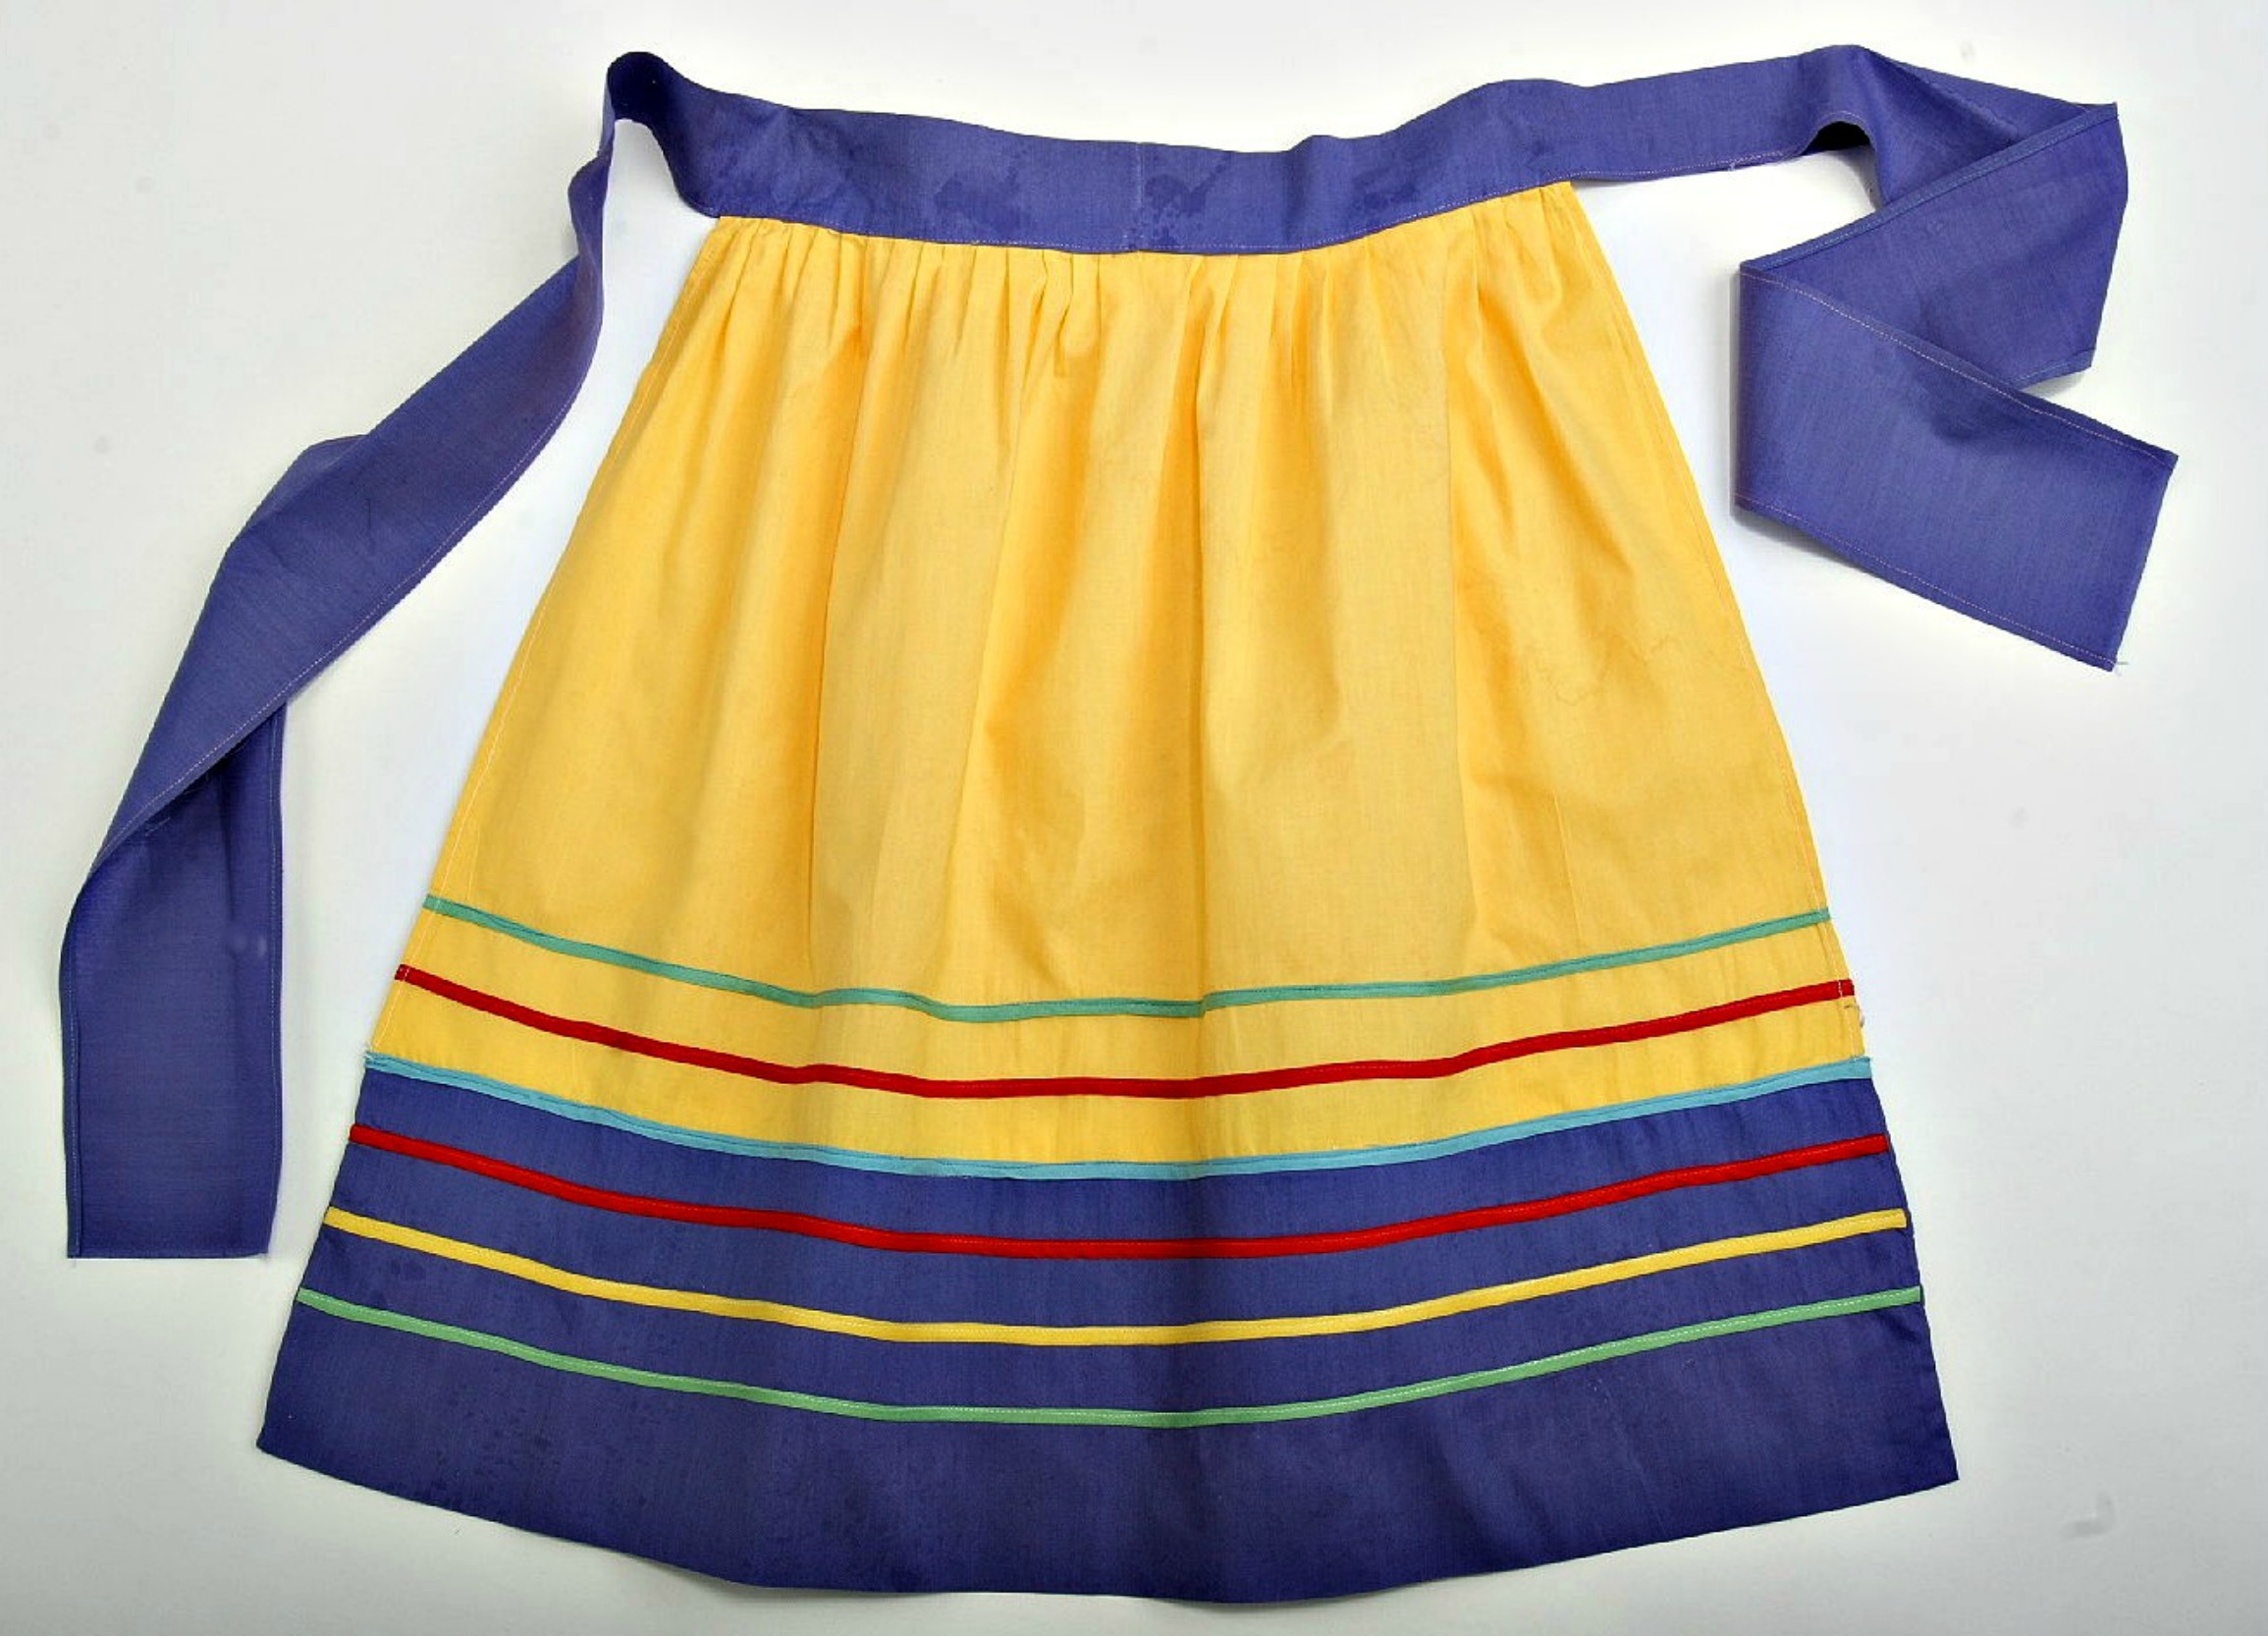 Photo of an apron. It is bright yellow, with a wide blue waistband and bottom border. Along the bottom of the apron are thin stripes of green, yellow, and red, created by bias tape that has been stitched to the apron.